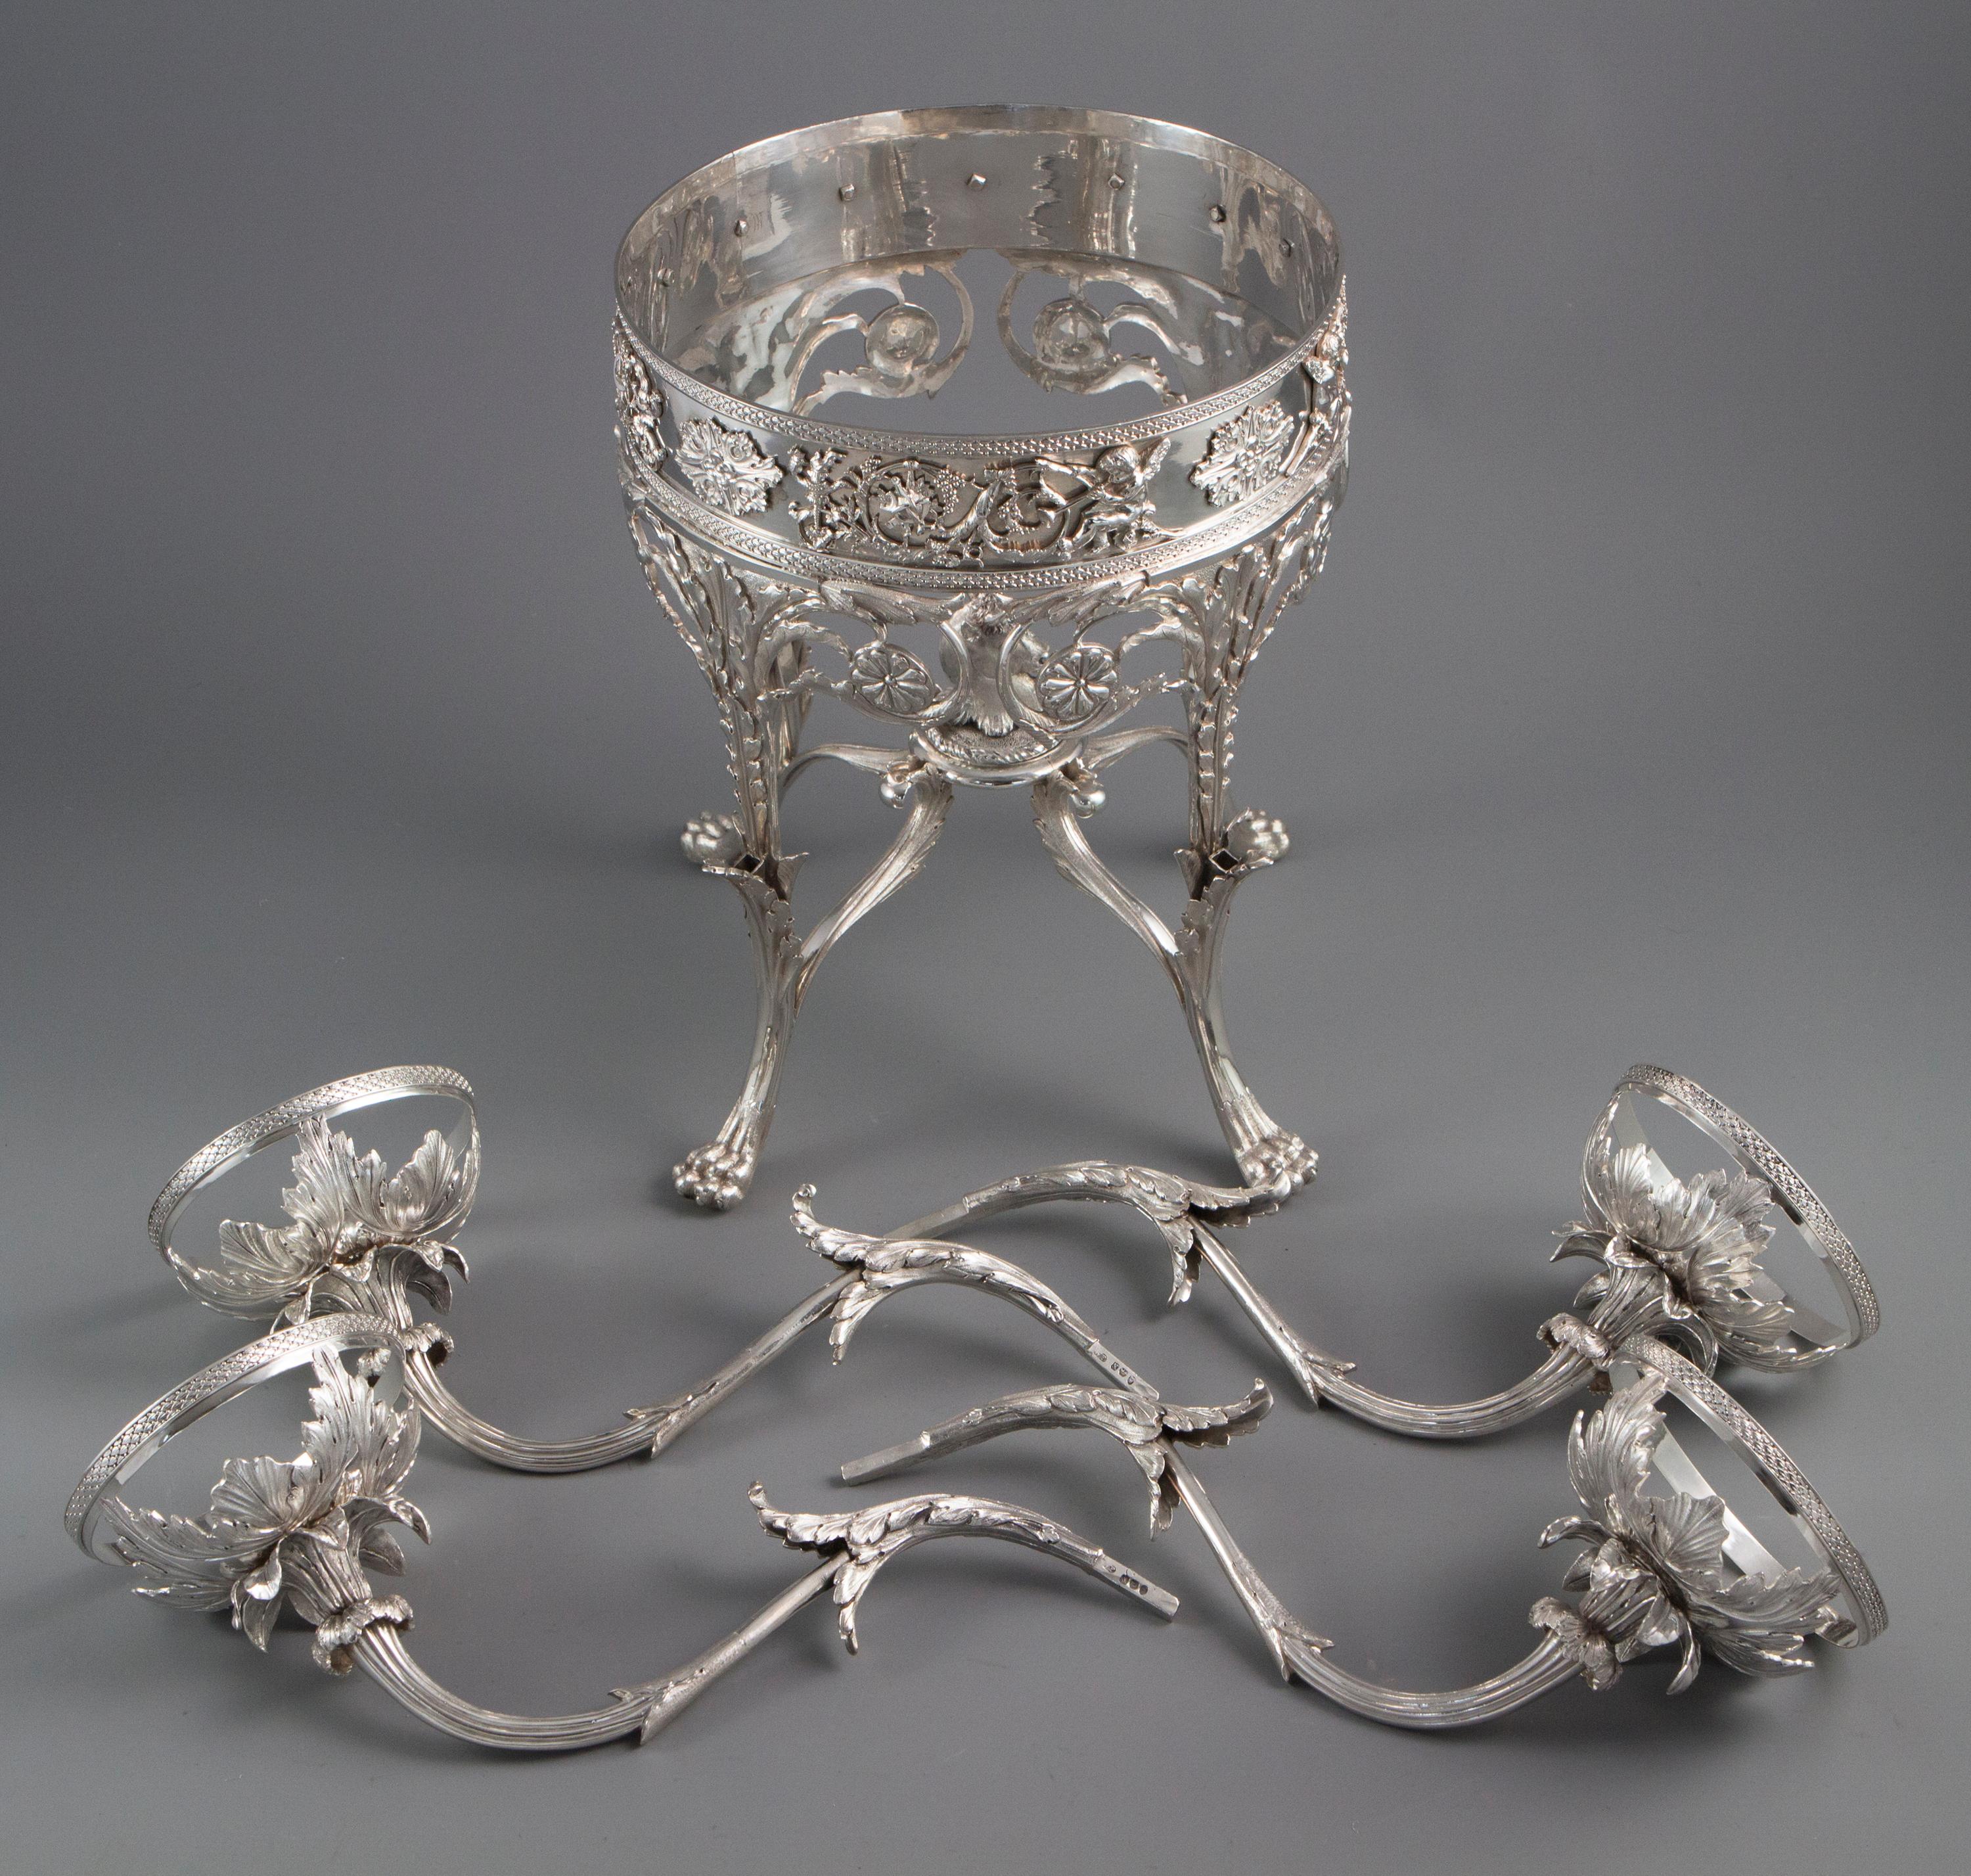 in 1799 the silver epergne cost